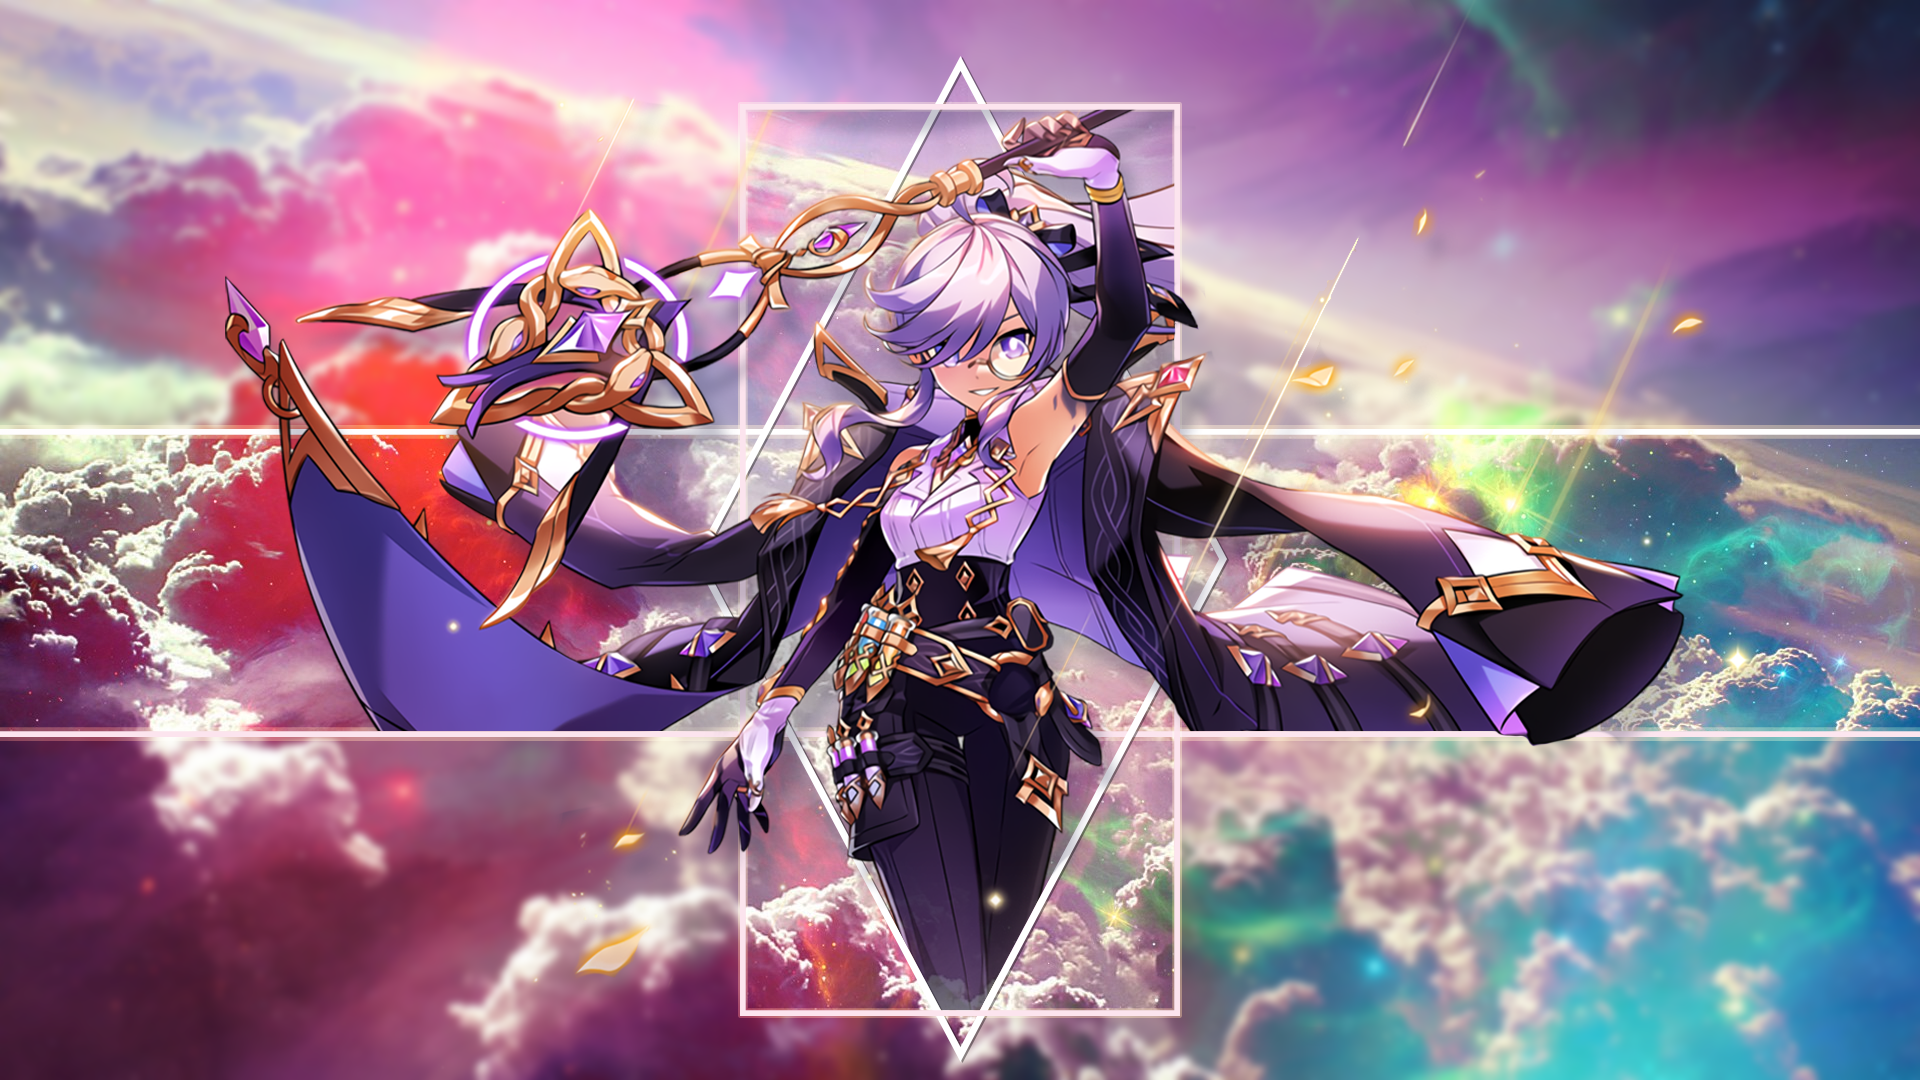 Elsword Aisha Elsword Anime Girls Picture In Picture Clouds Stars Space Fantasy Art 1920x1080